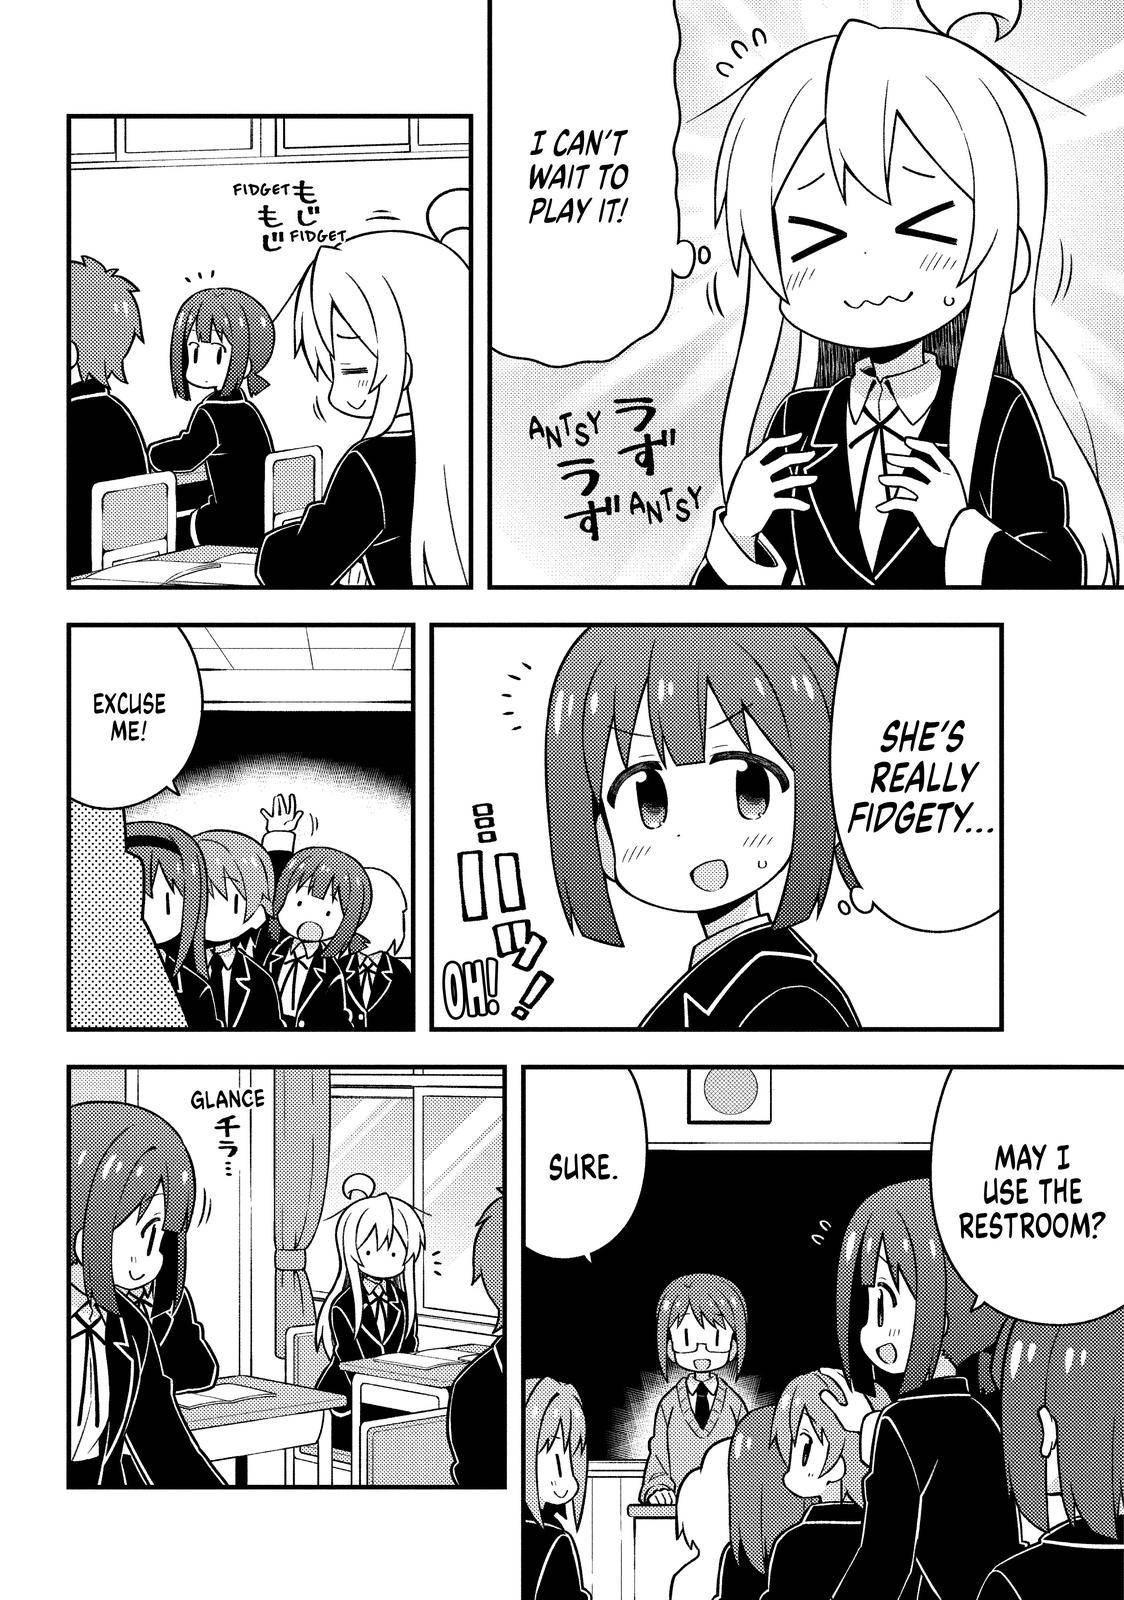 ONIMAI - I'm Now Your Sister! - chapter 24 - #4